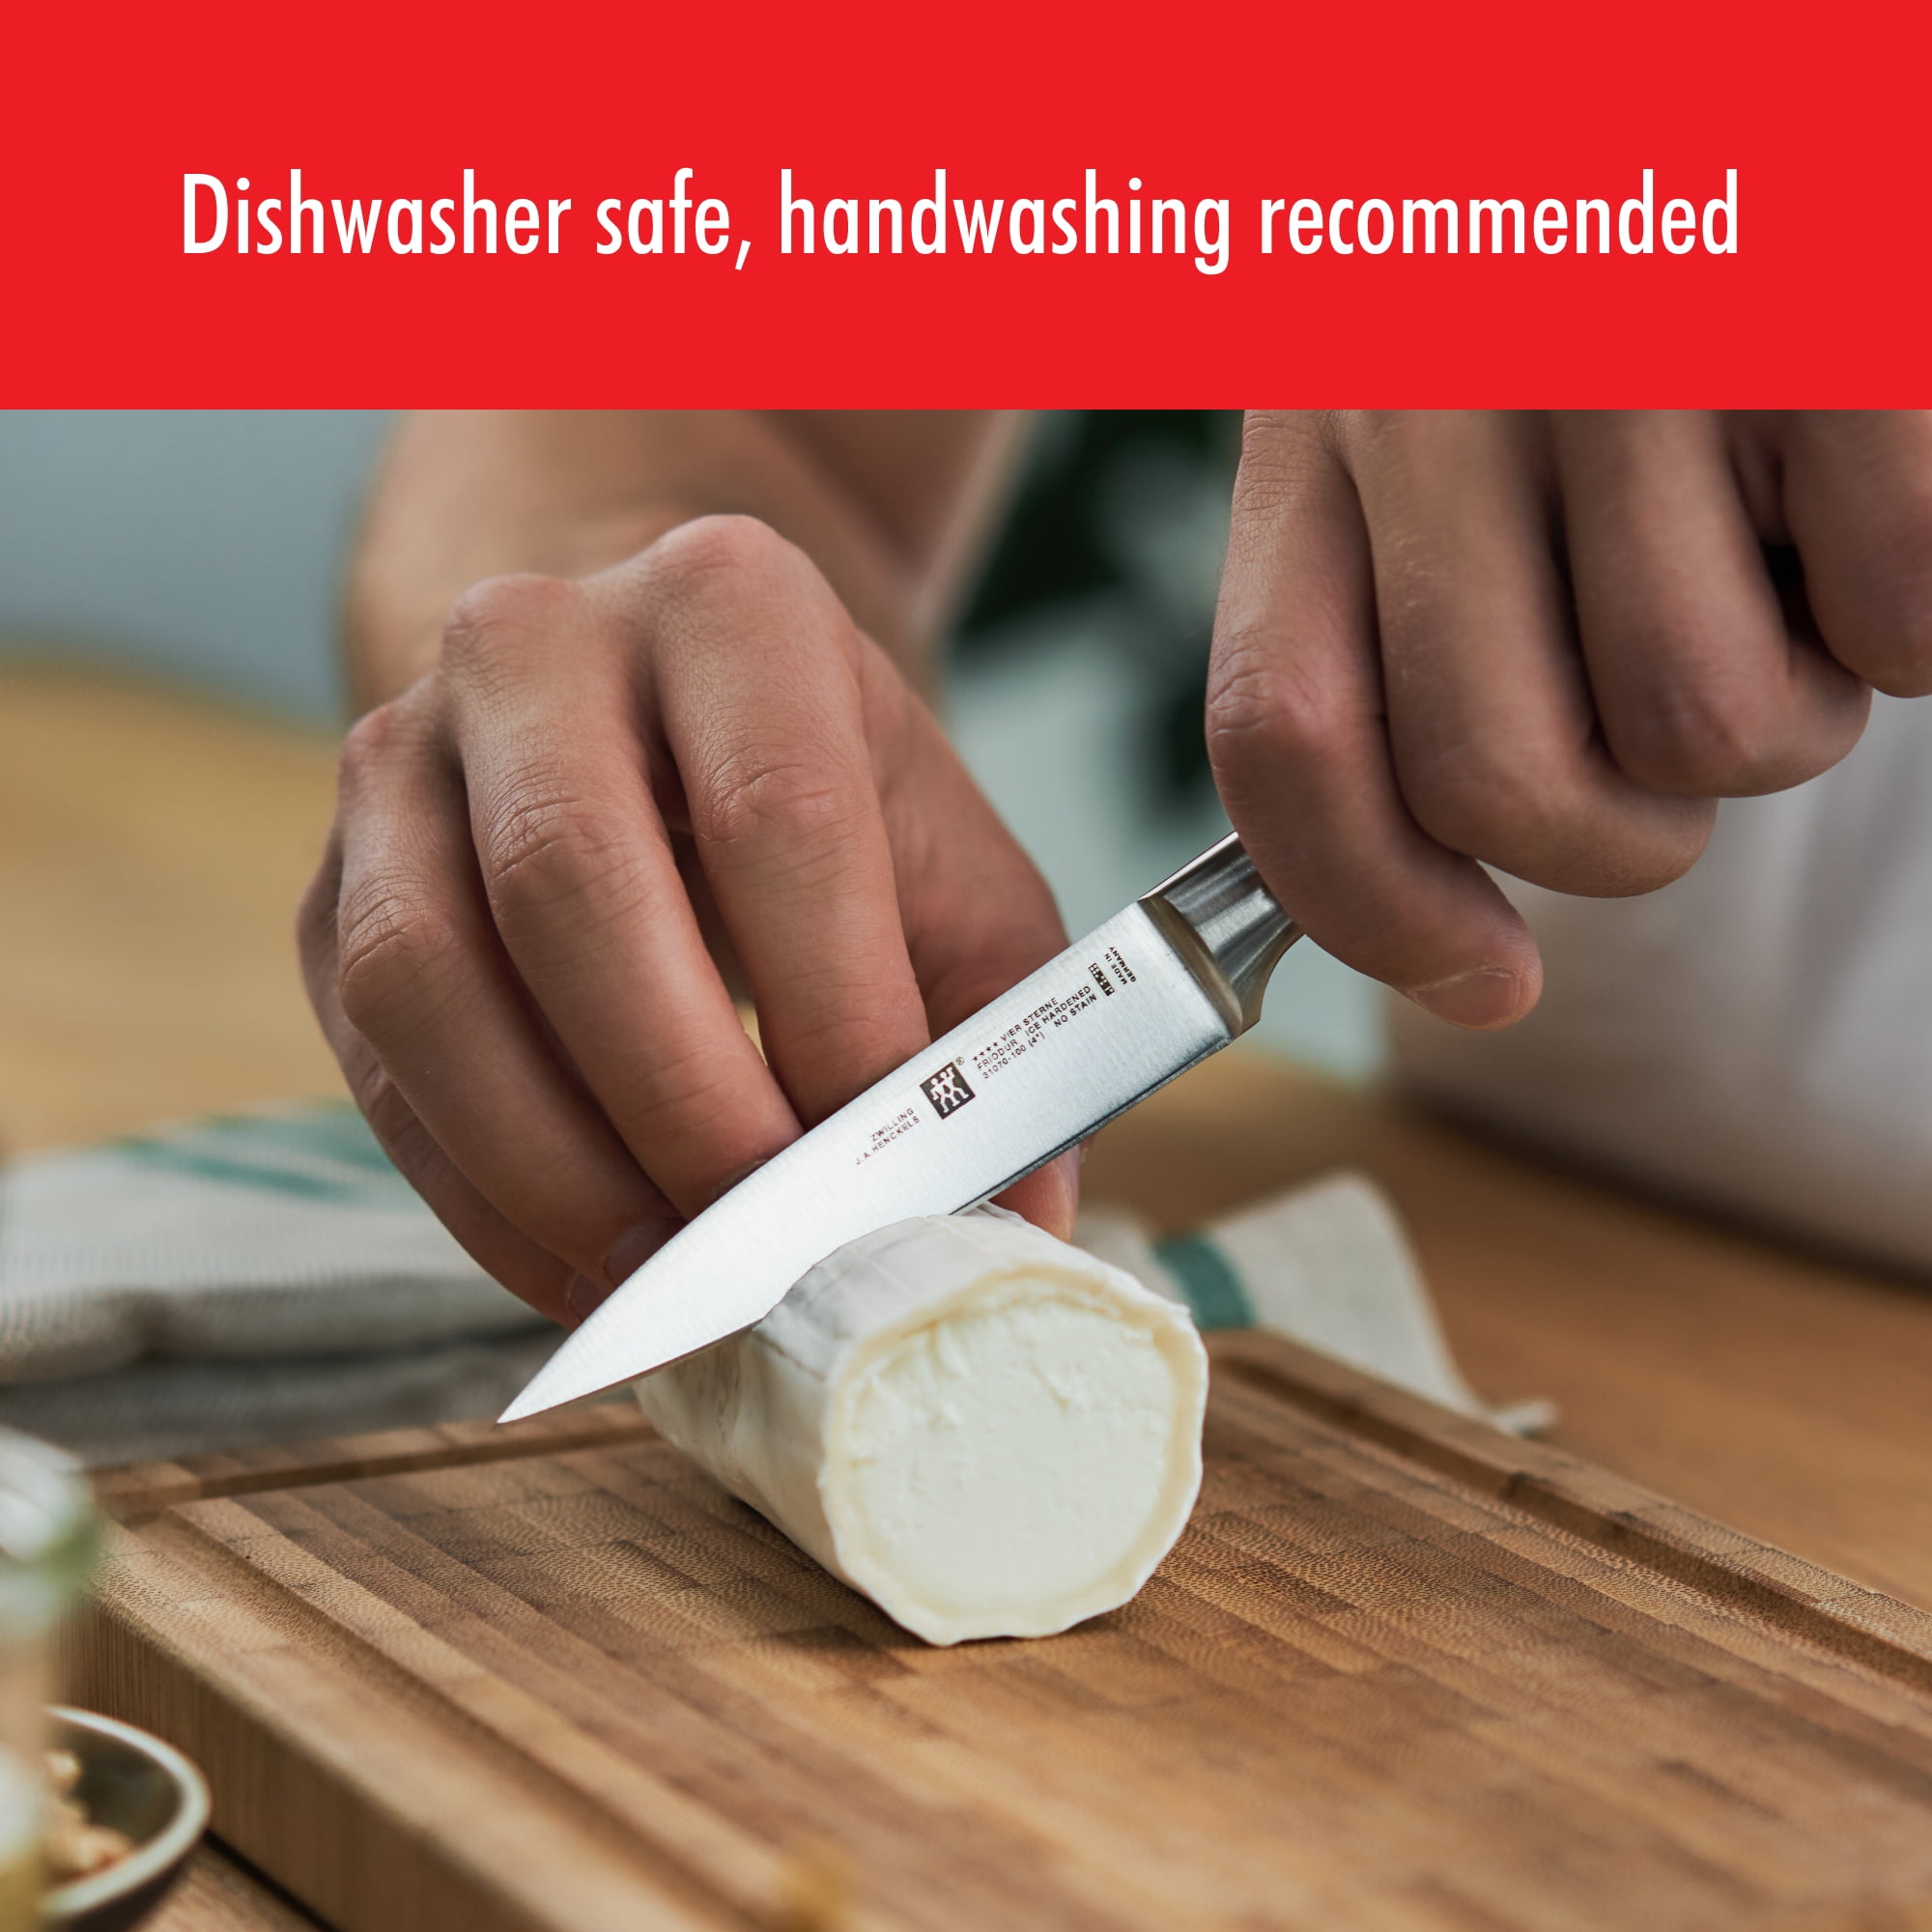  Zwilling J.A. Henckels Twin Four Star 4-Inch High